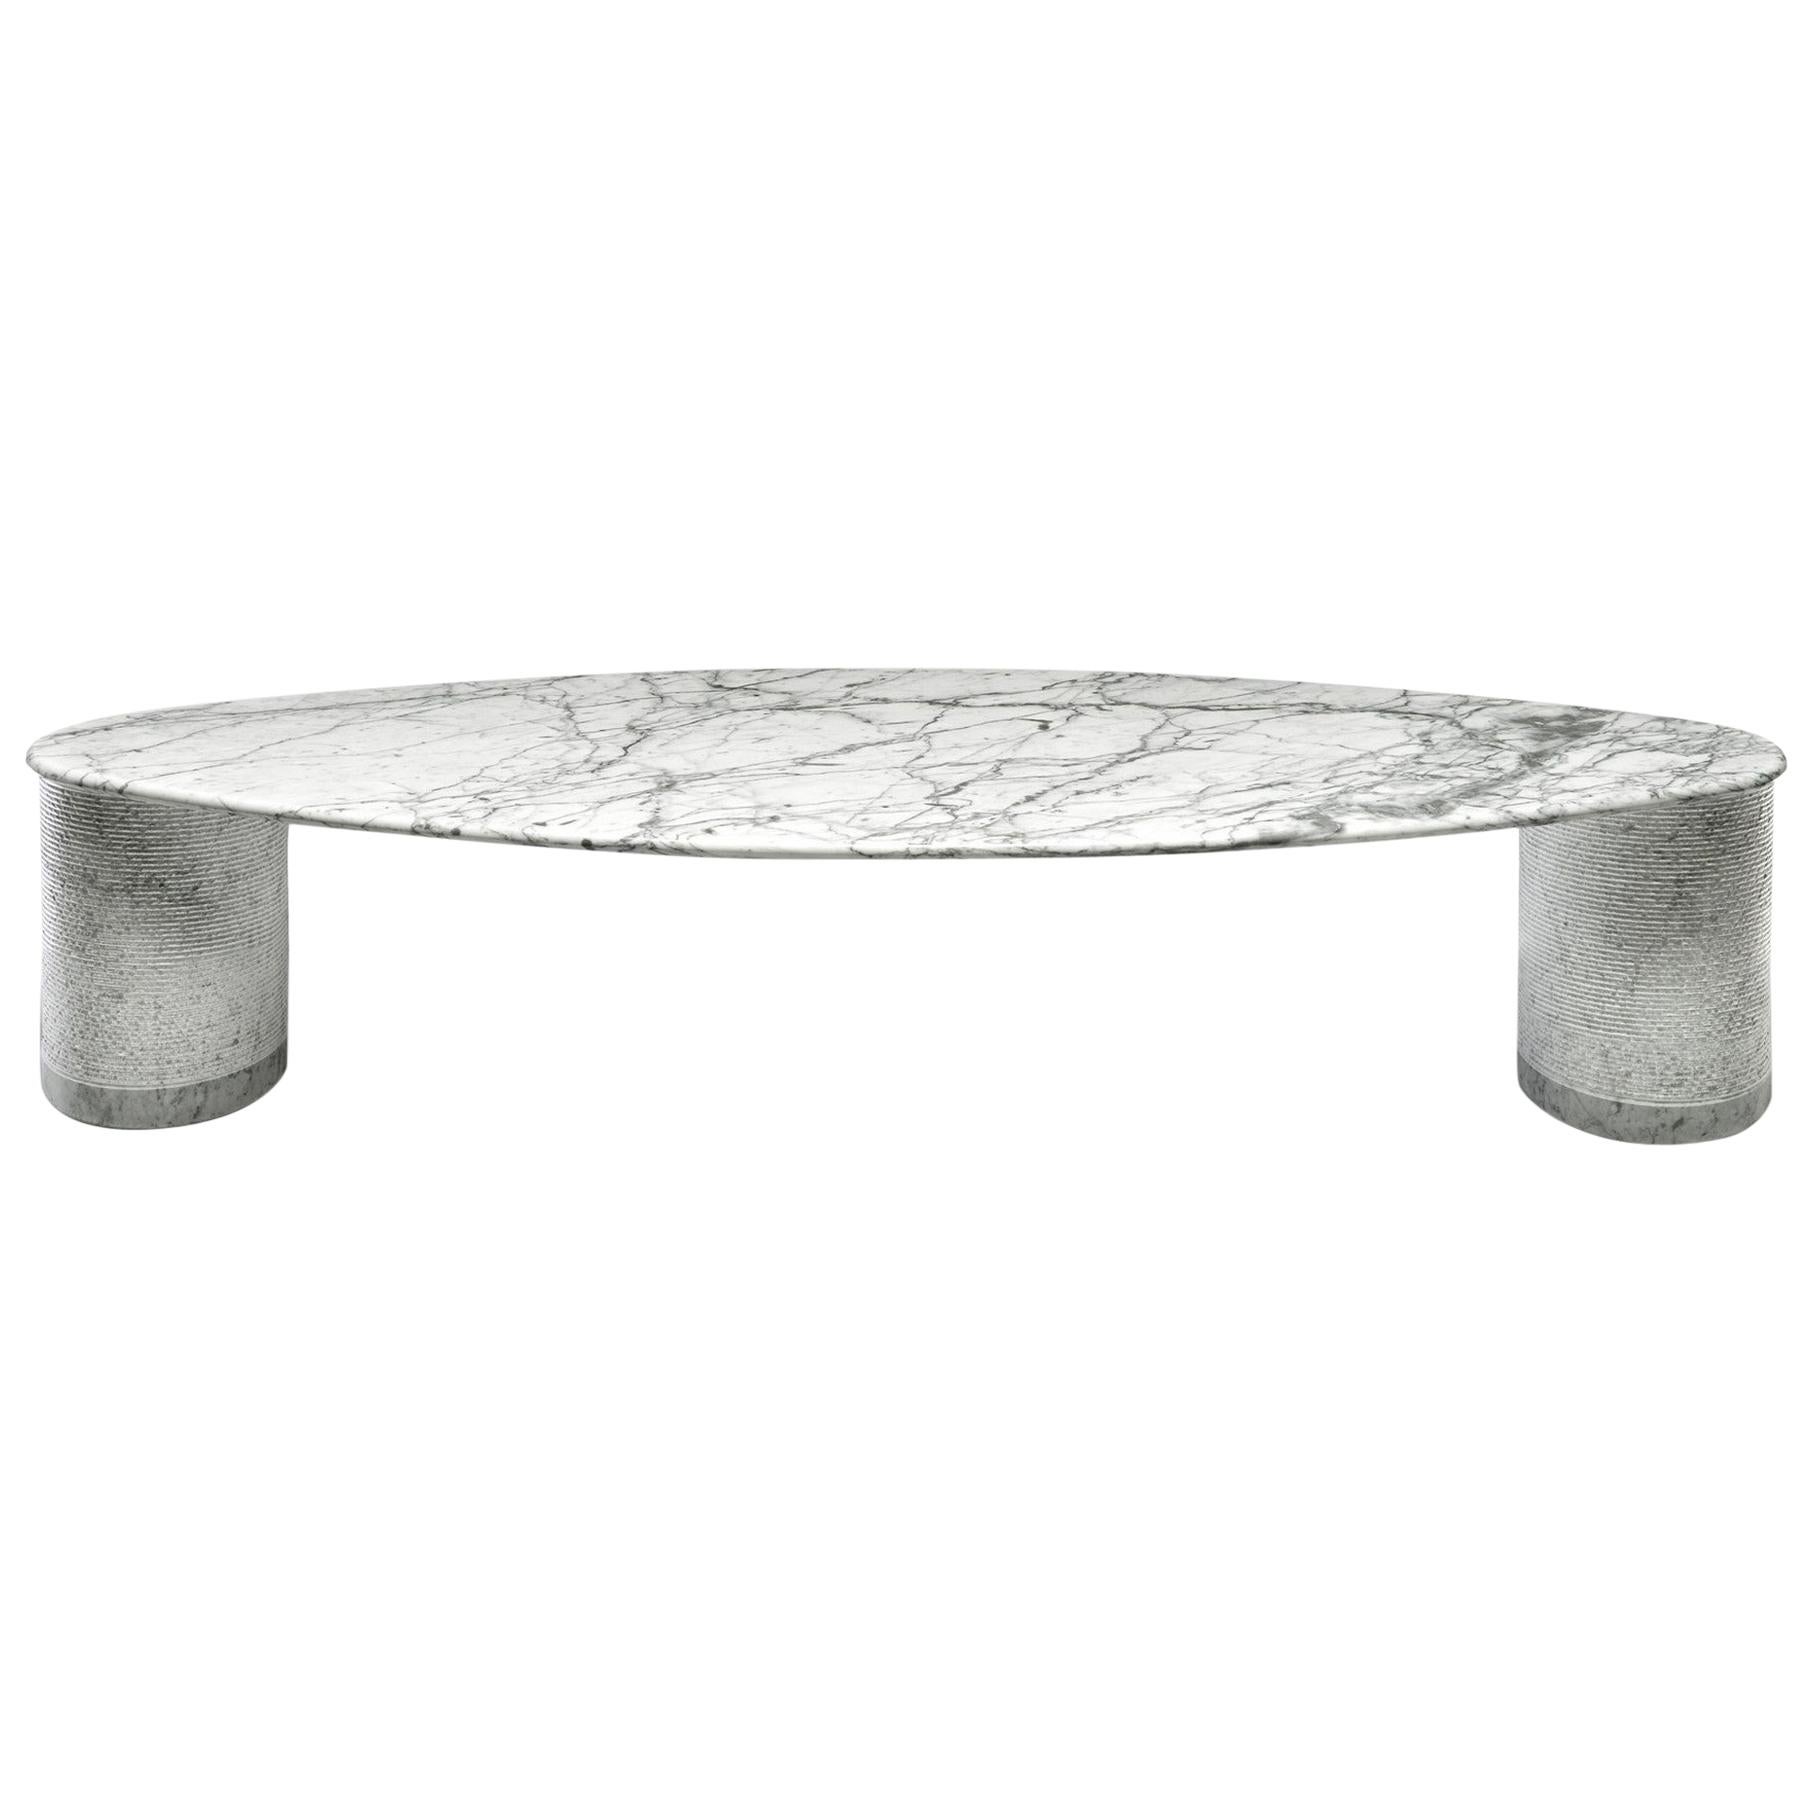 Lazzotti Estremista Cocktail Table Carrara Marble Official Re-Edition of 1985